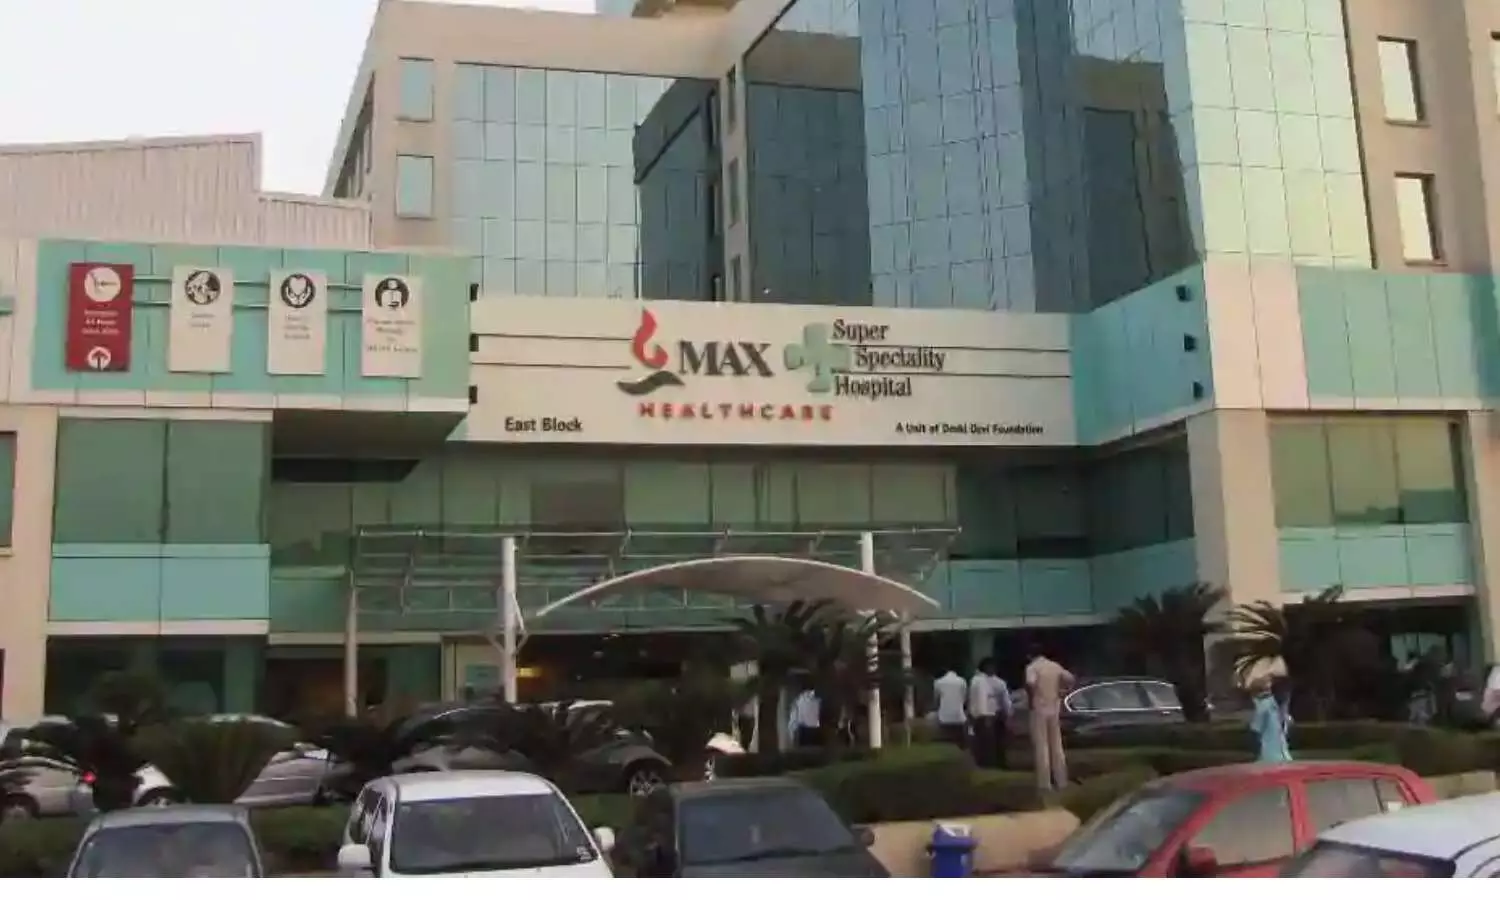 Doctors at Max Super Speciality Hospital successfully remove bilateral adrenal tumours from 51-year-old patient